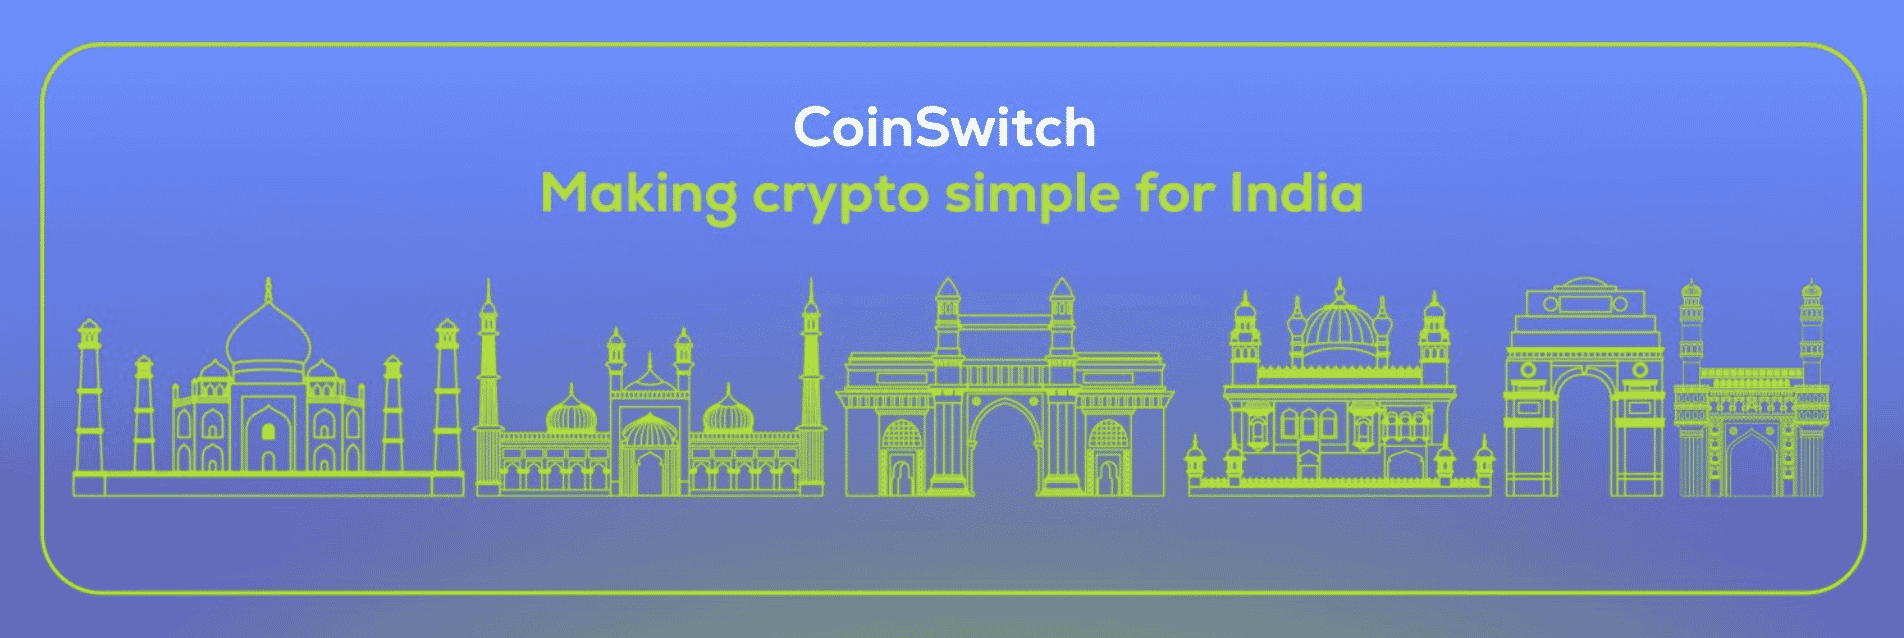 CoinSwitch Is Not Under Investigation For Laundering – CEO Claims